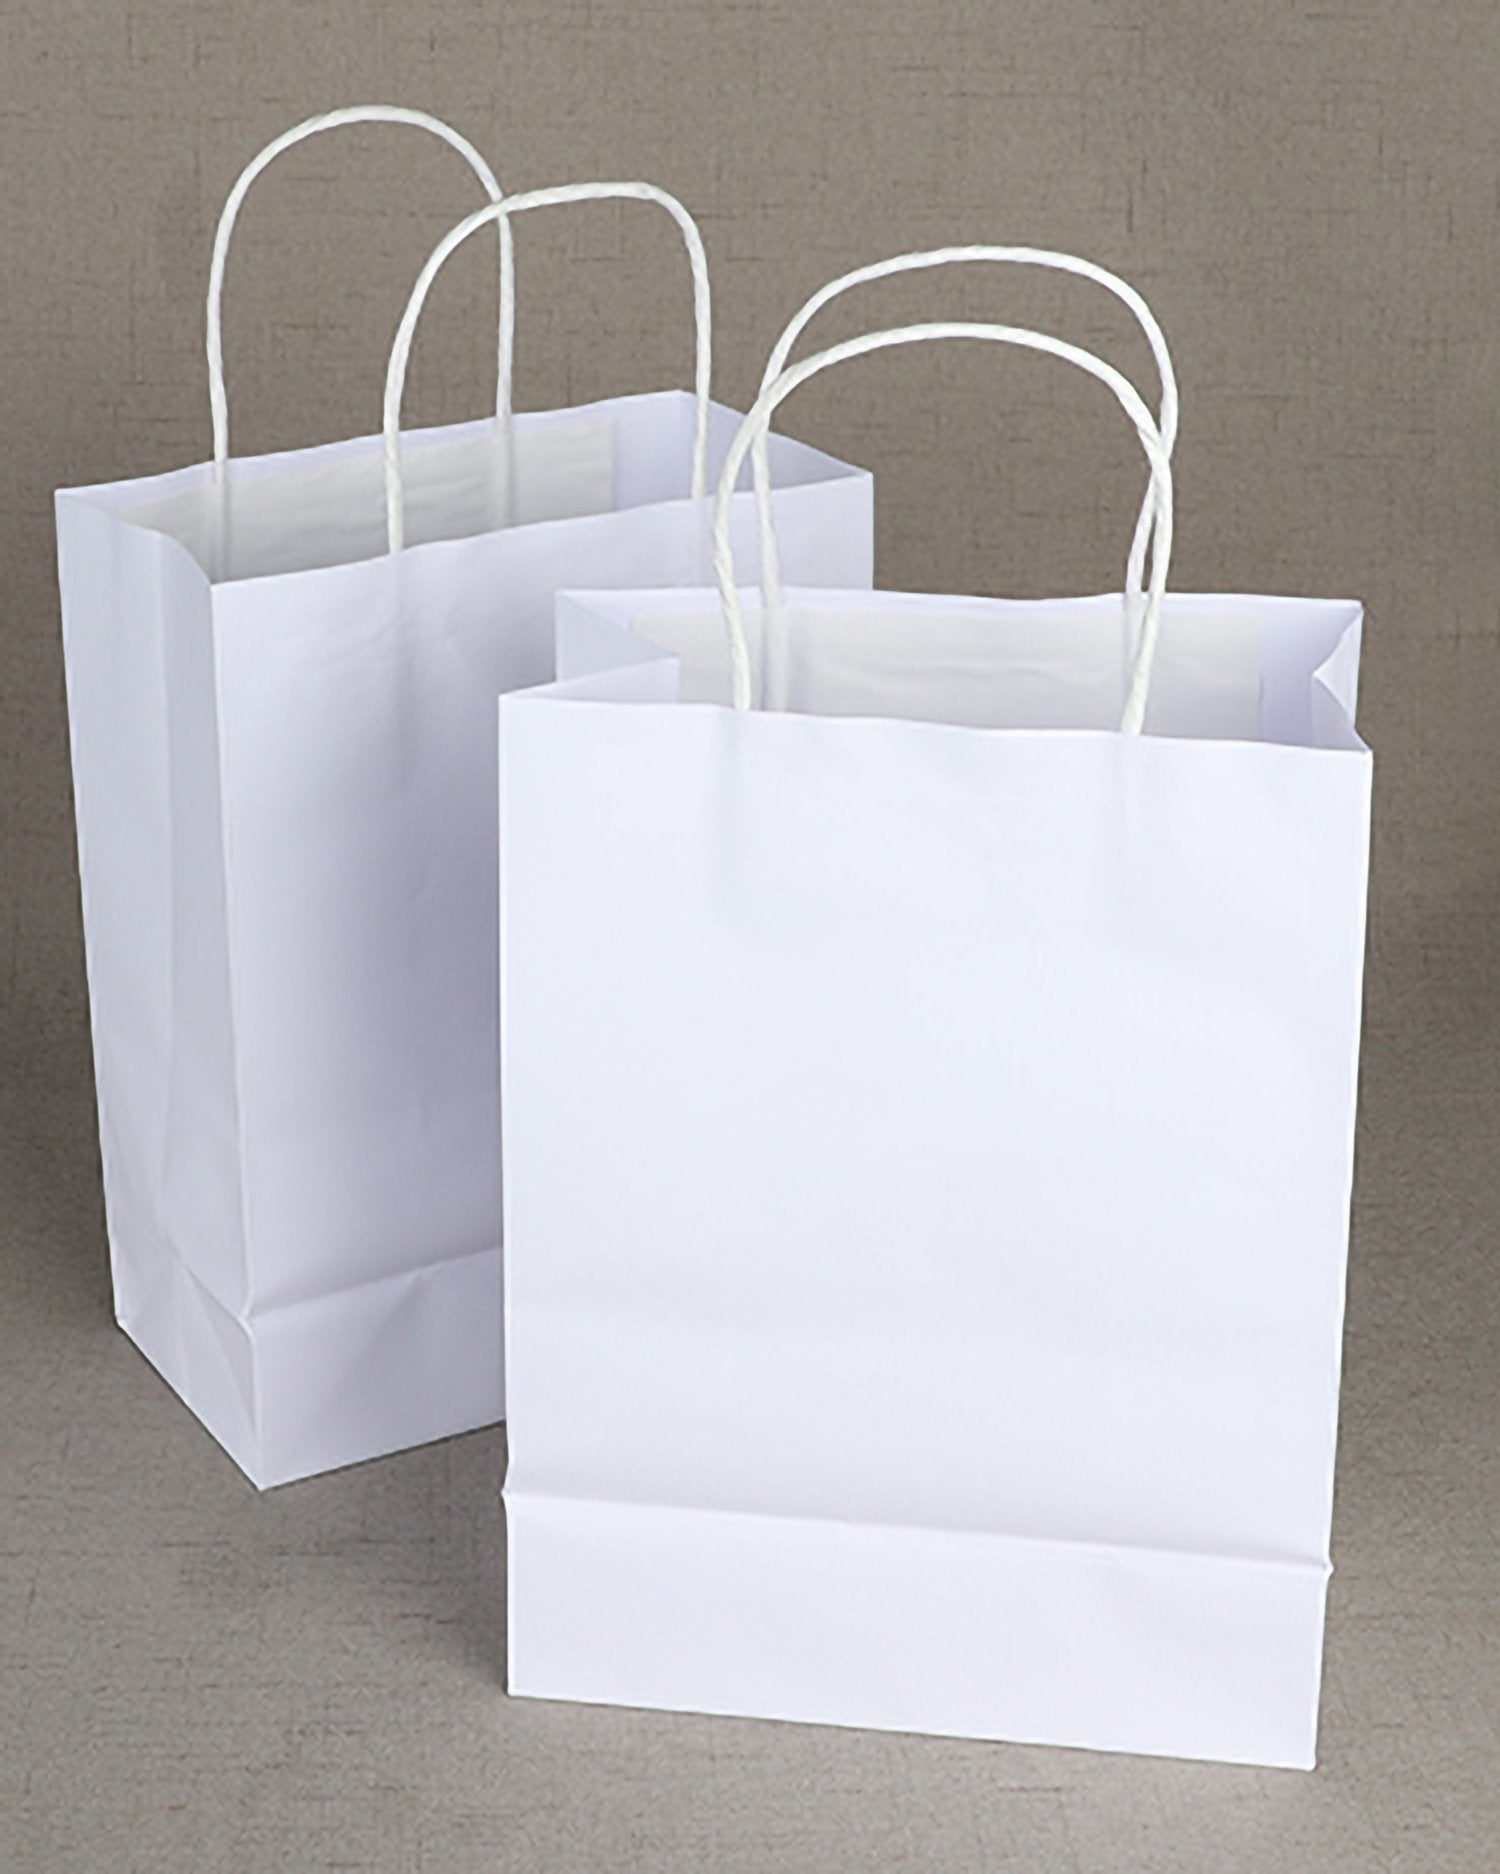 2x Kraft Paper Bags with Tags Ribbon Wedding Gift Favor Welcome Bags for  Party Guests – Wadbeev